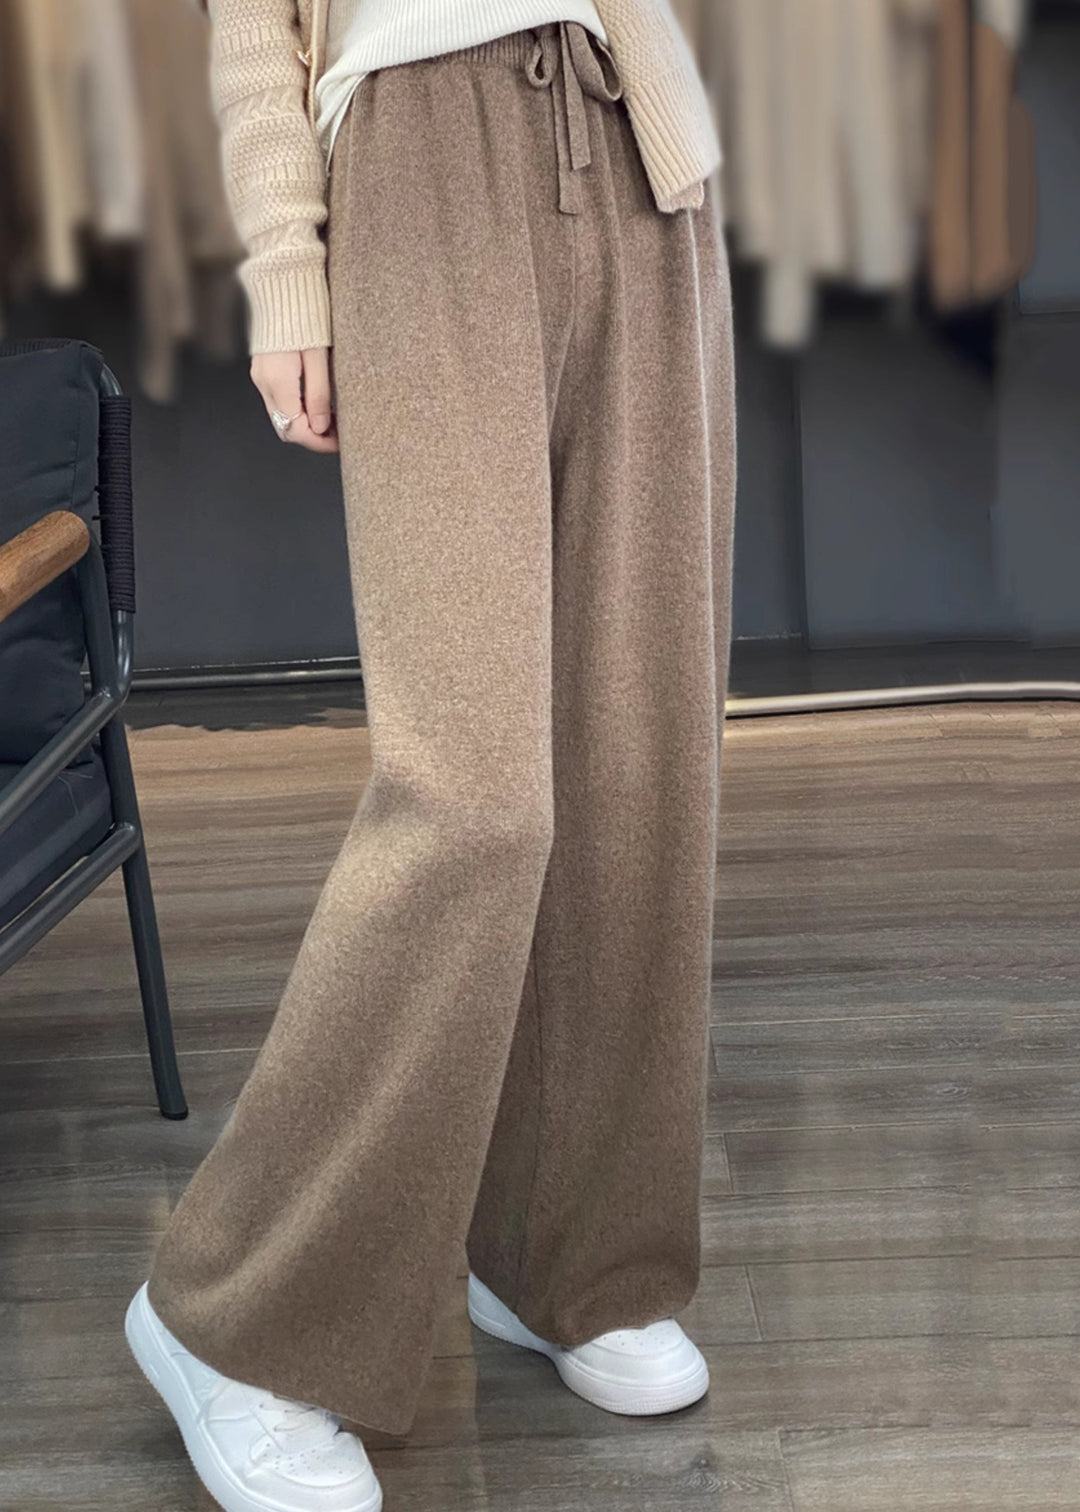 New Camel High Waist Patchwork Thick Wool Knit Pants Fall